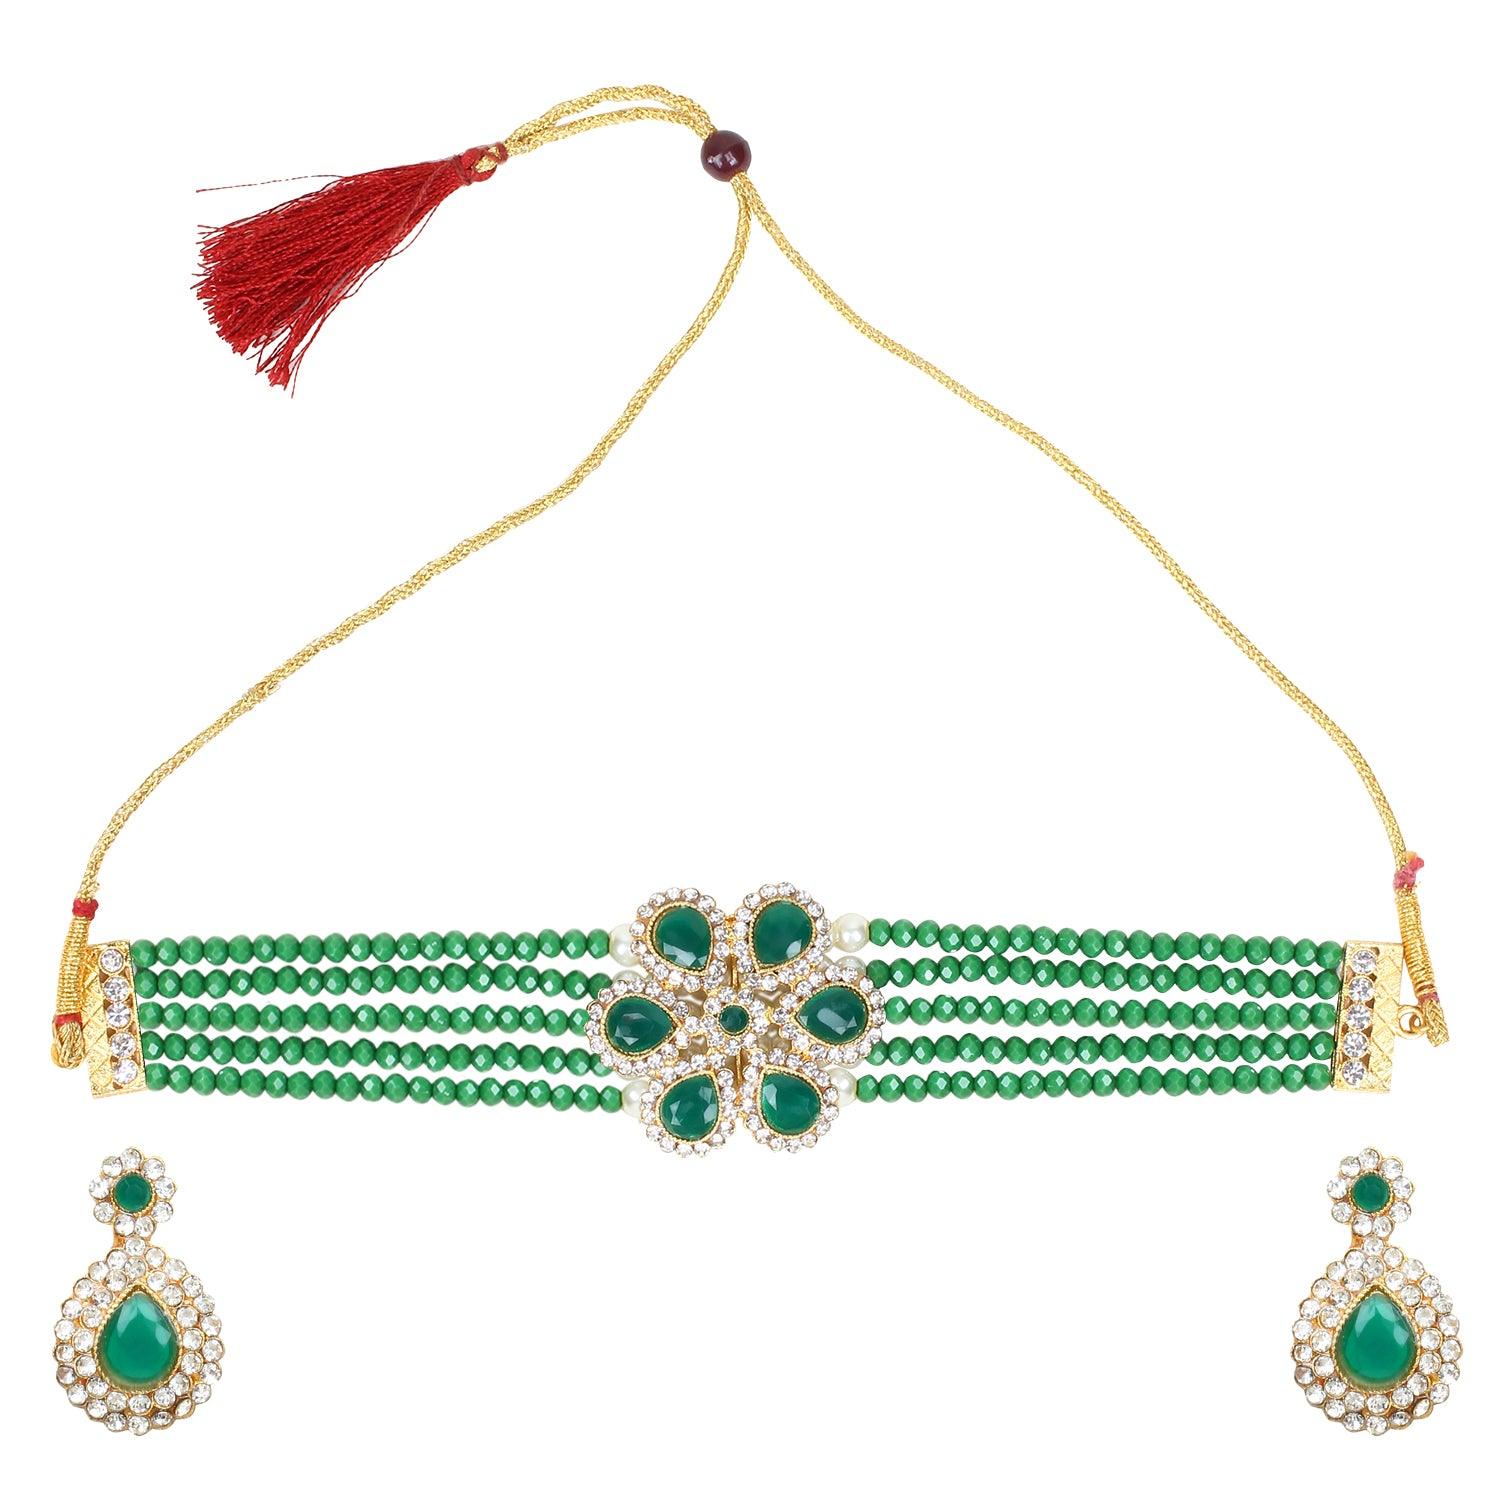 Kundan and Green Beads Choker Necklace Set for Women and Girls